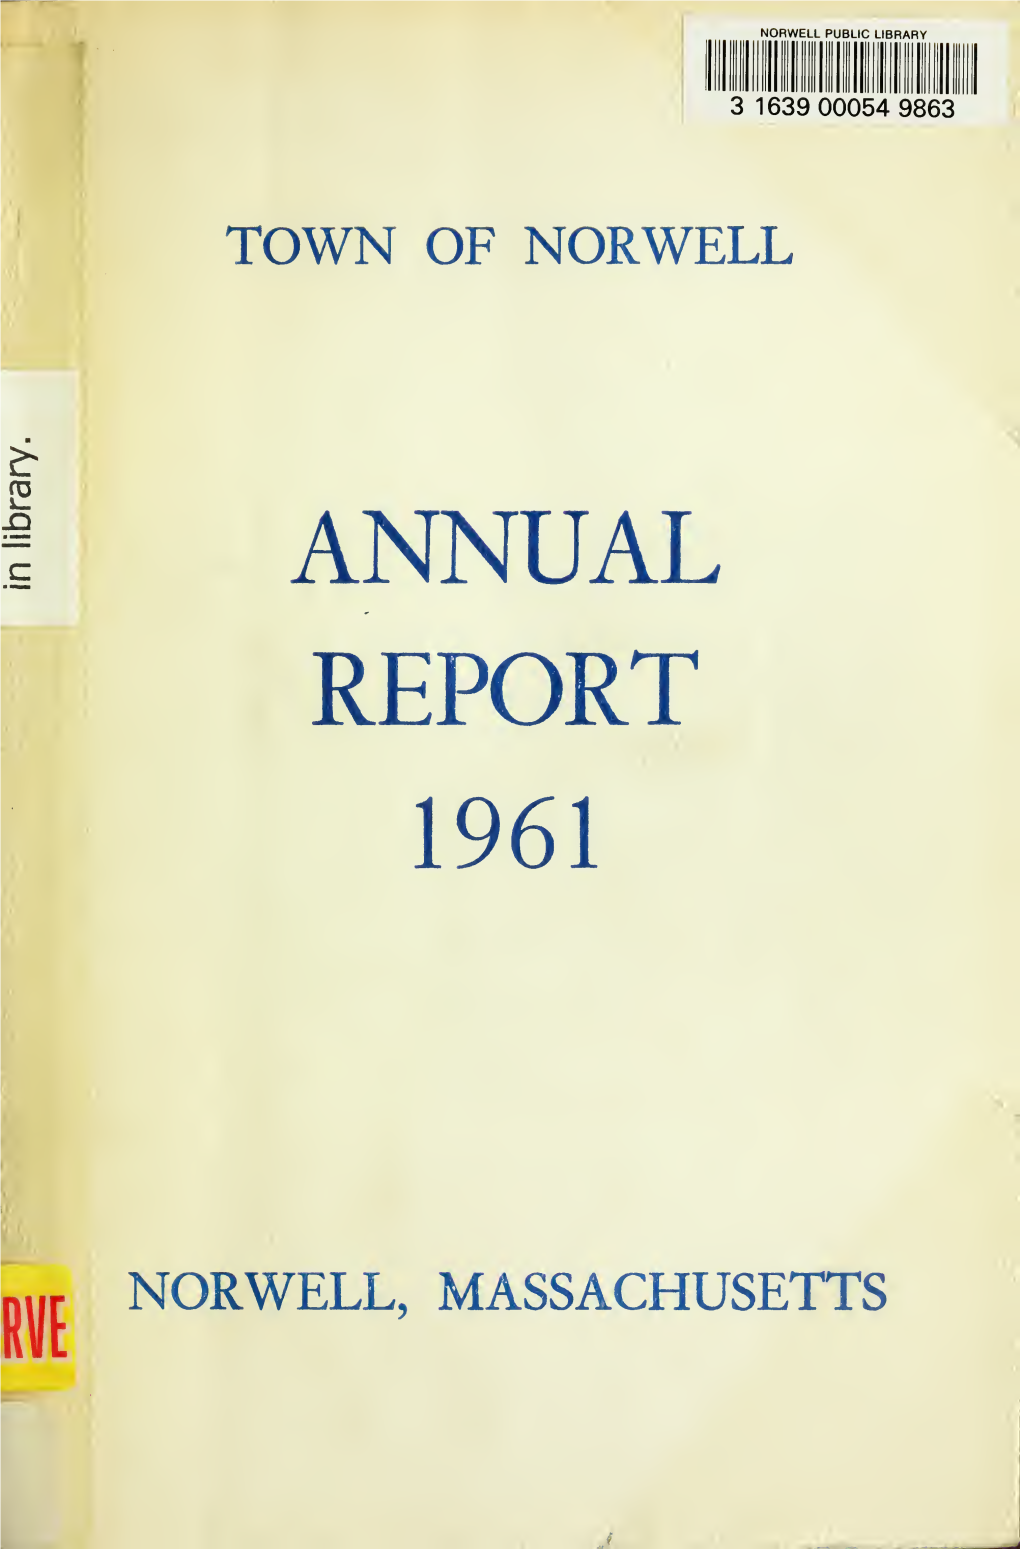 Town of Norwell Annual Report